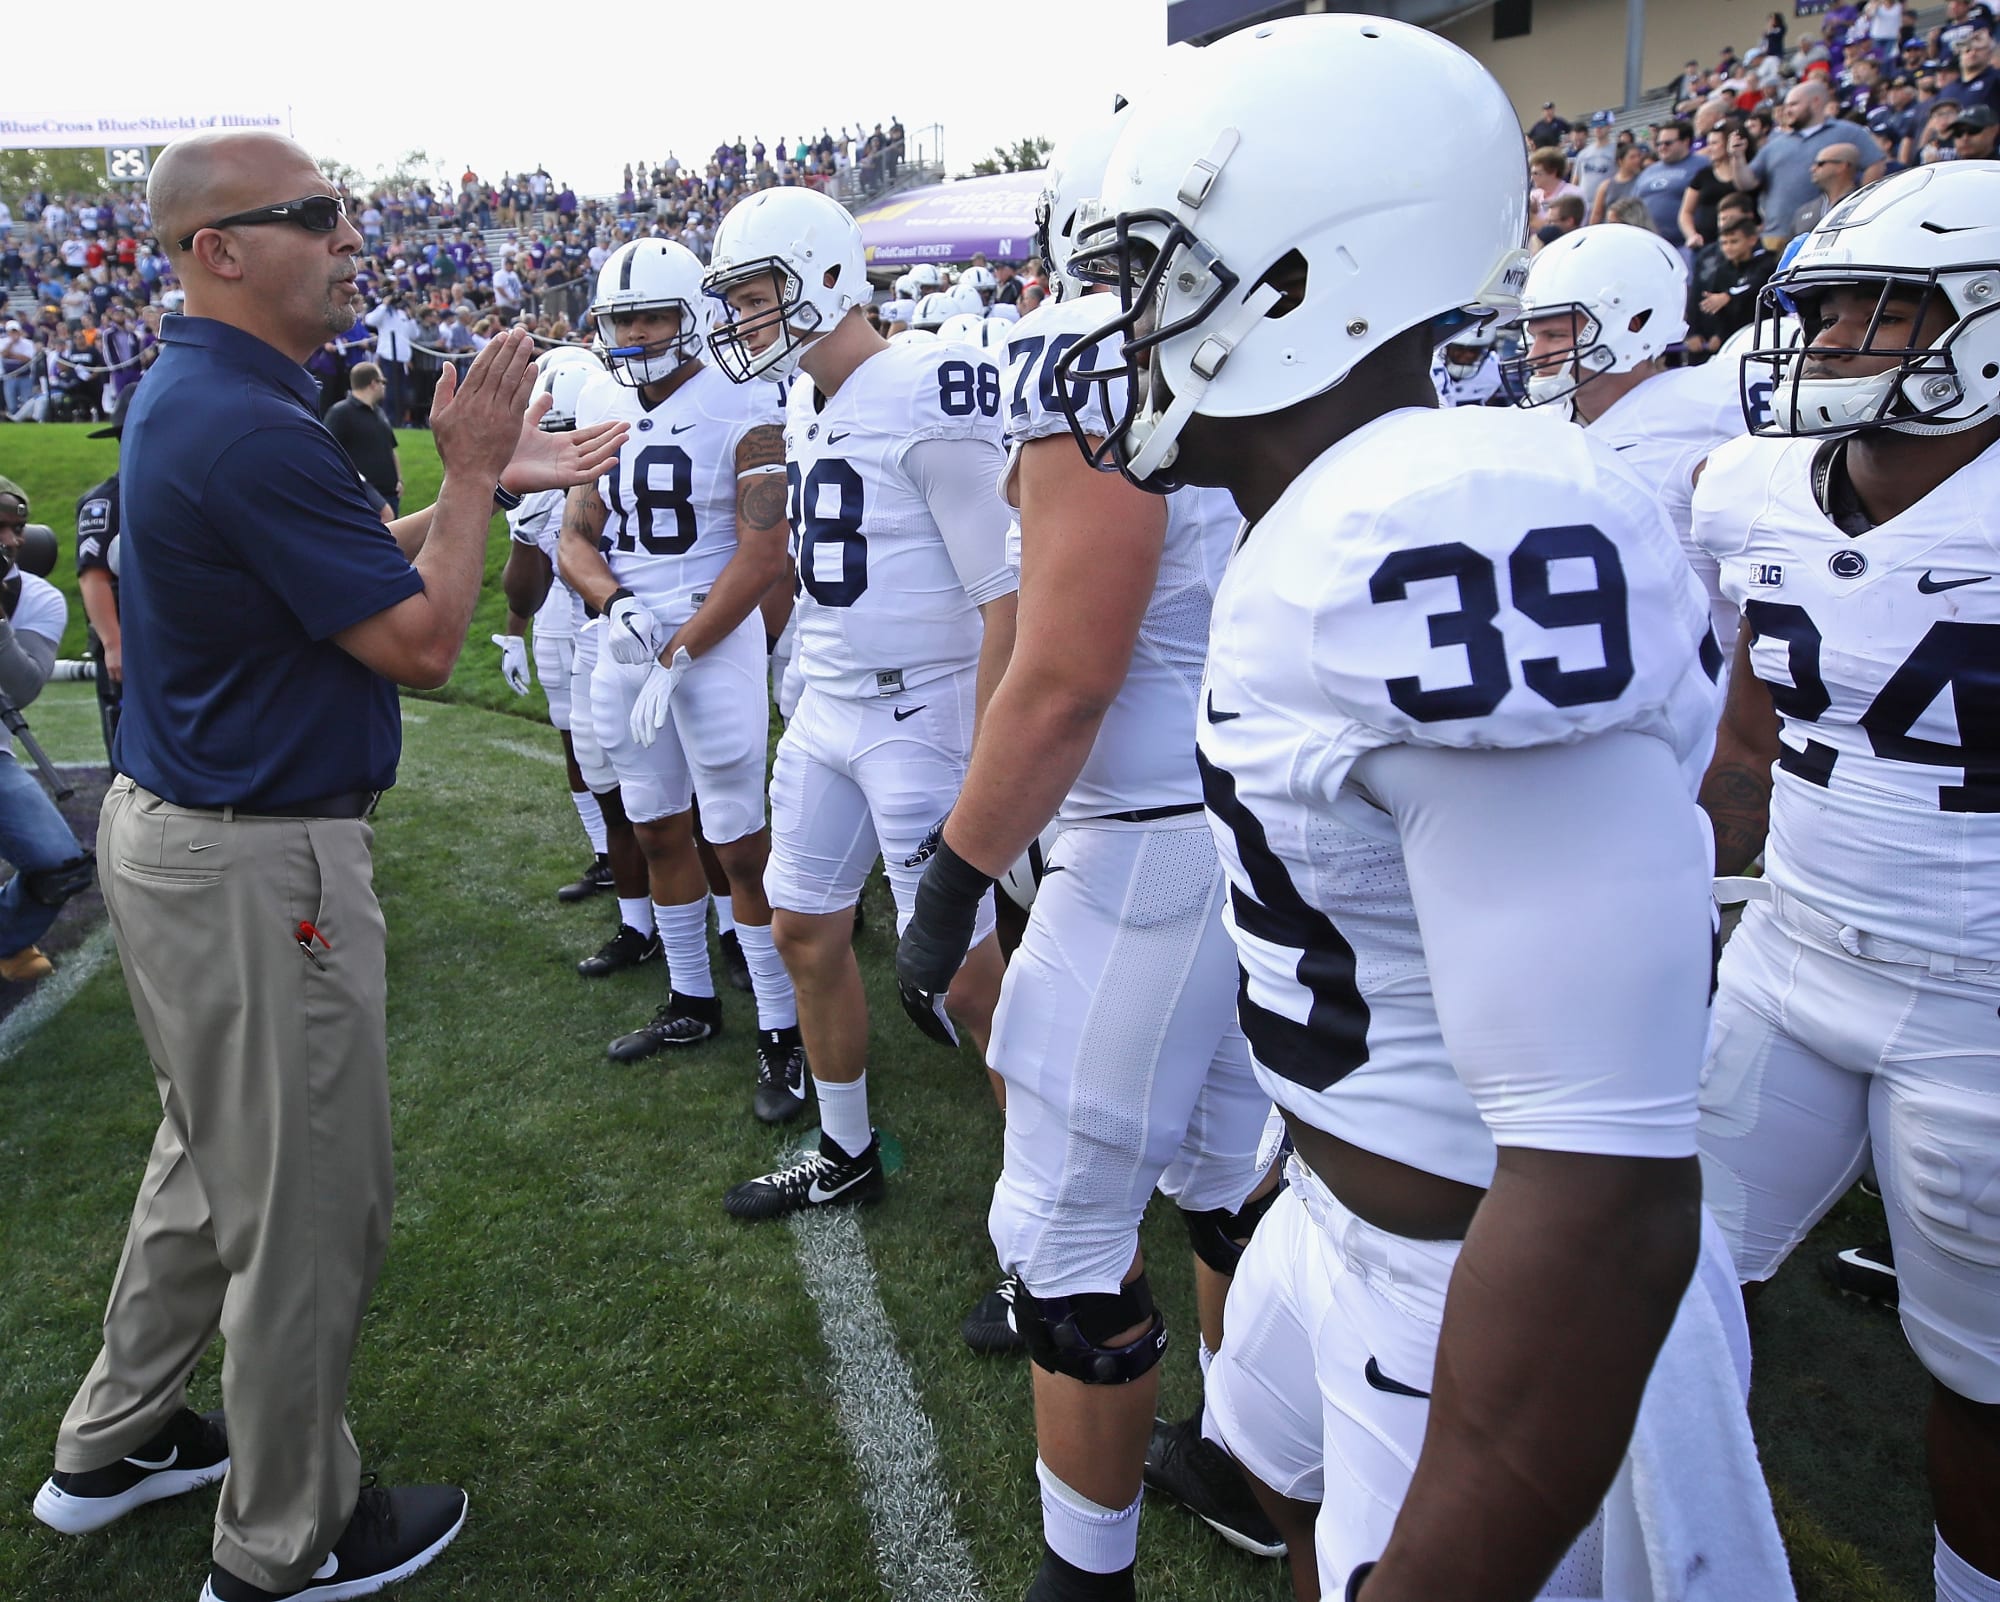 Where does Penn State football rank in ESPN's power index?